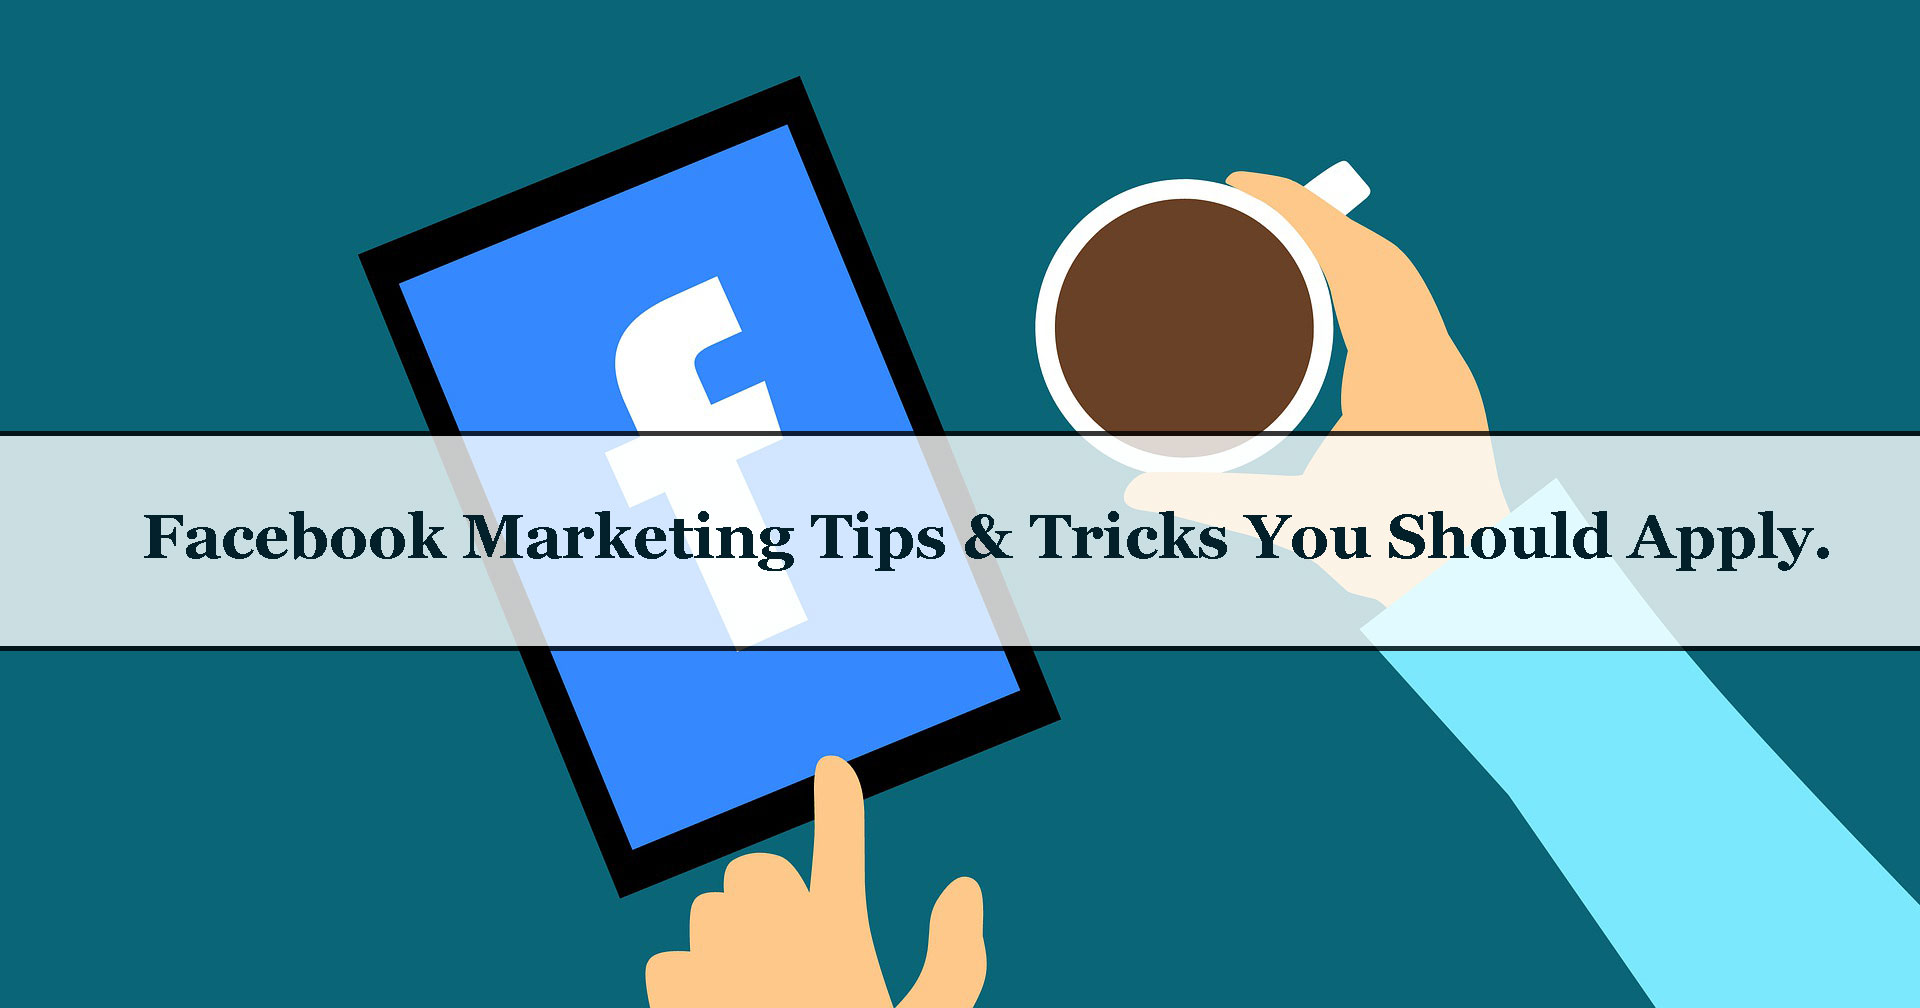 Top 7 Facebook Marketing Tips Every Business Should Know